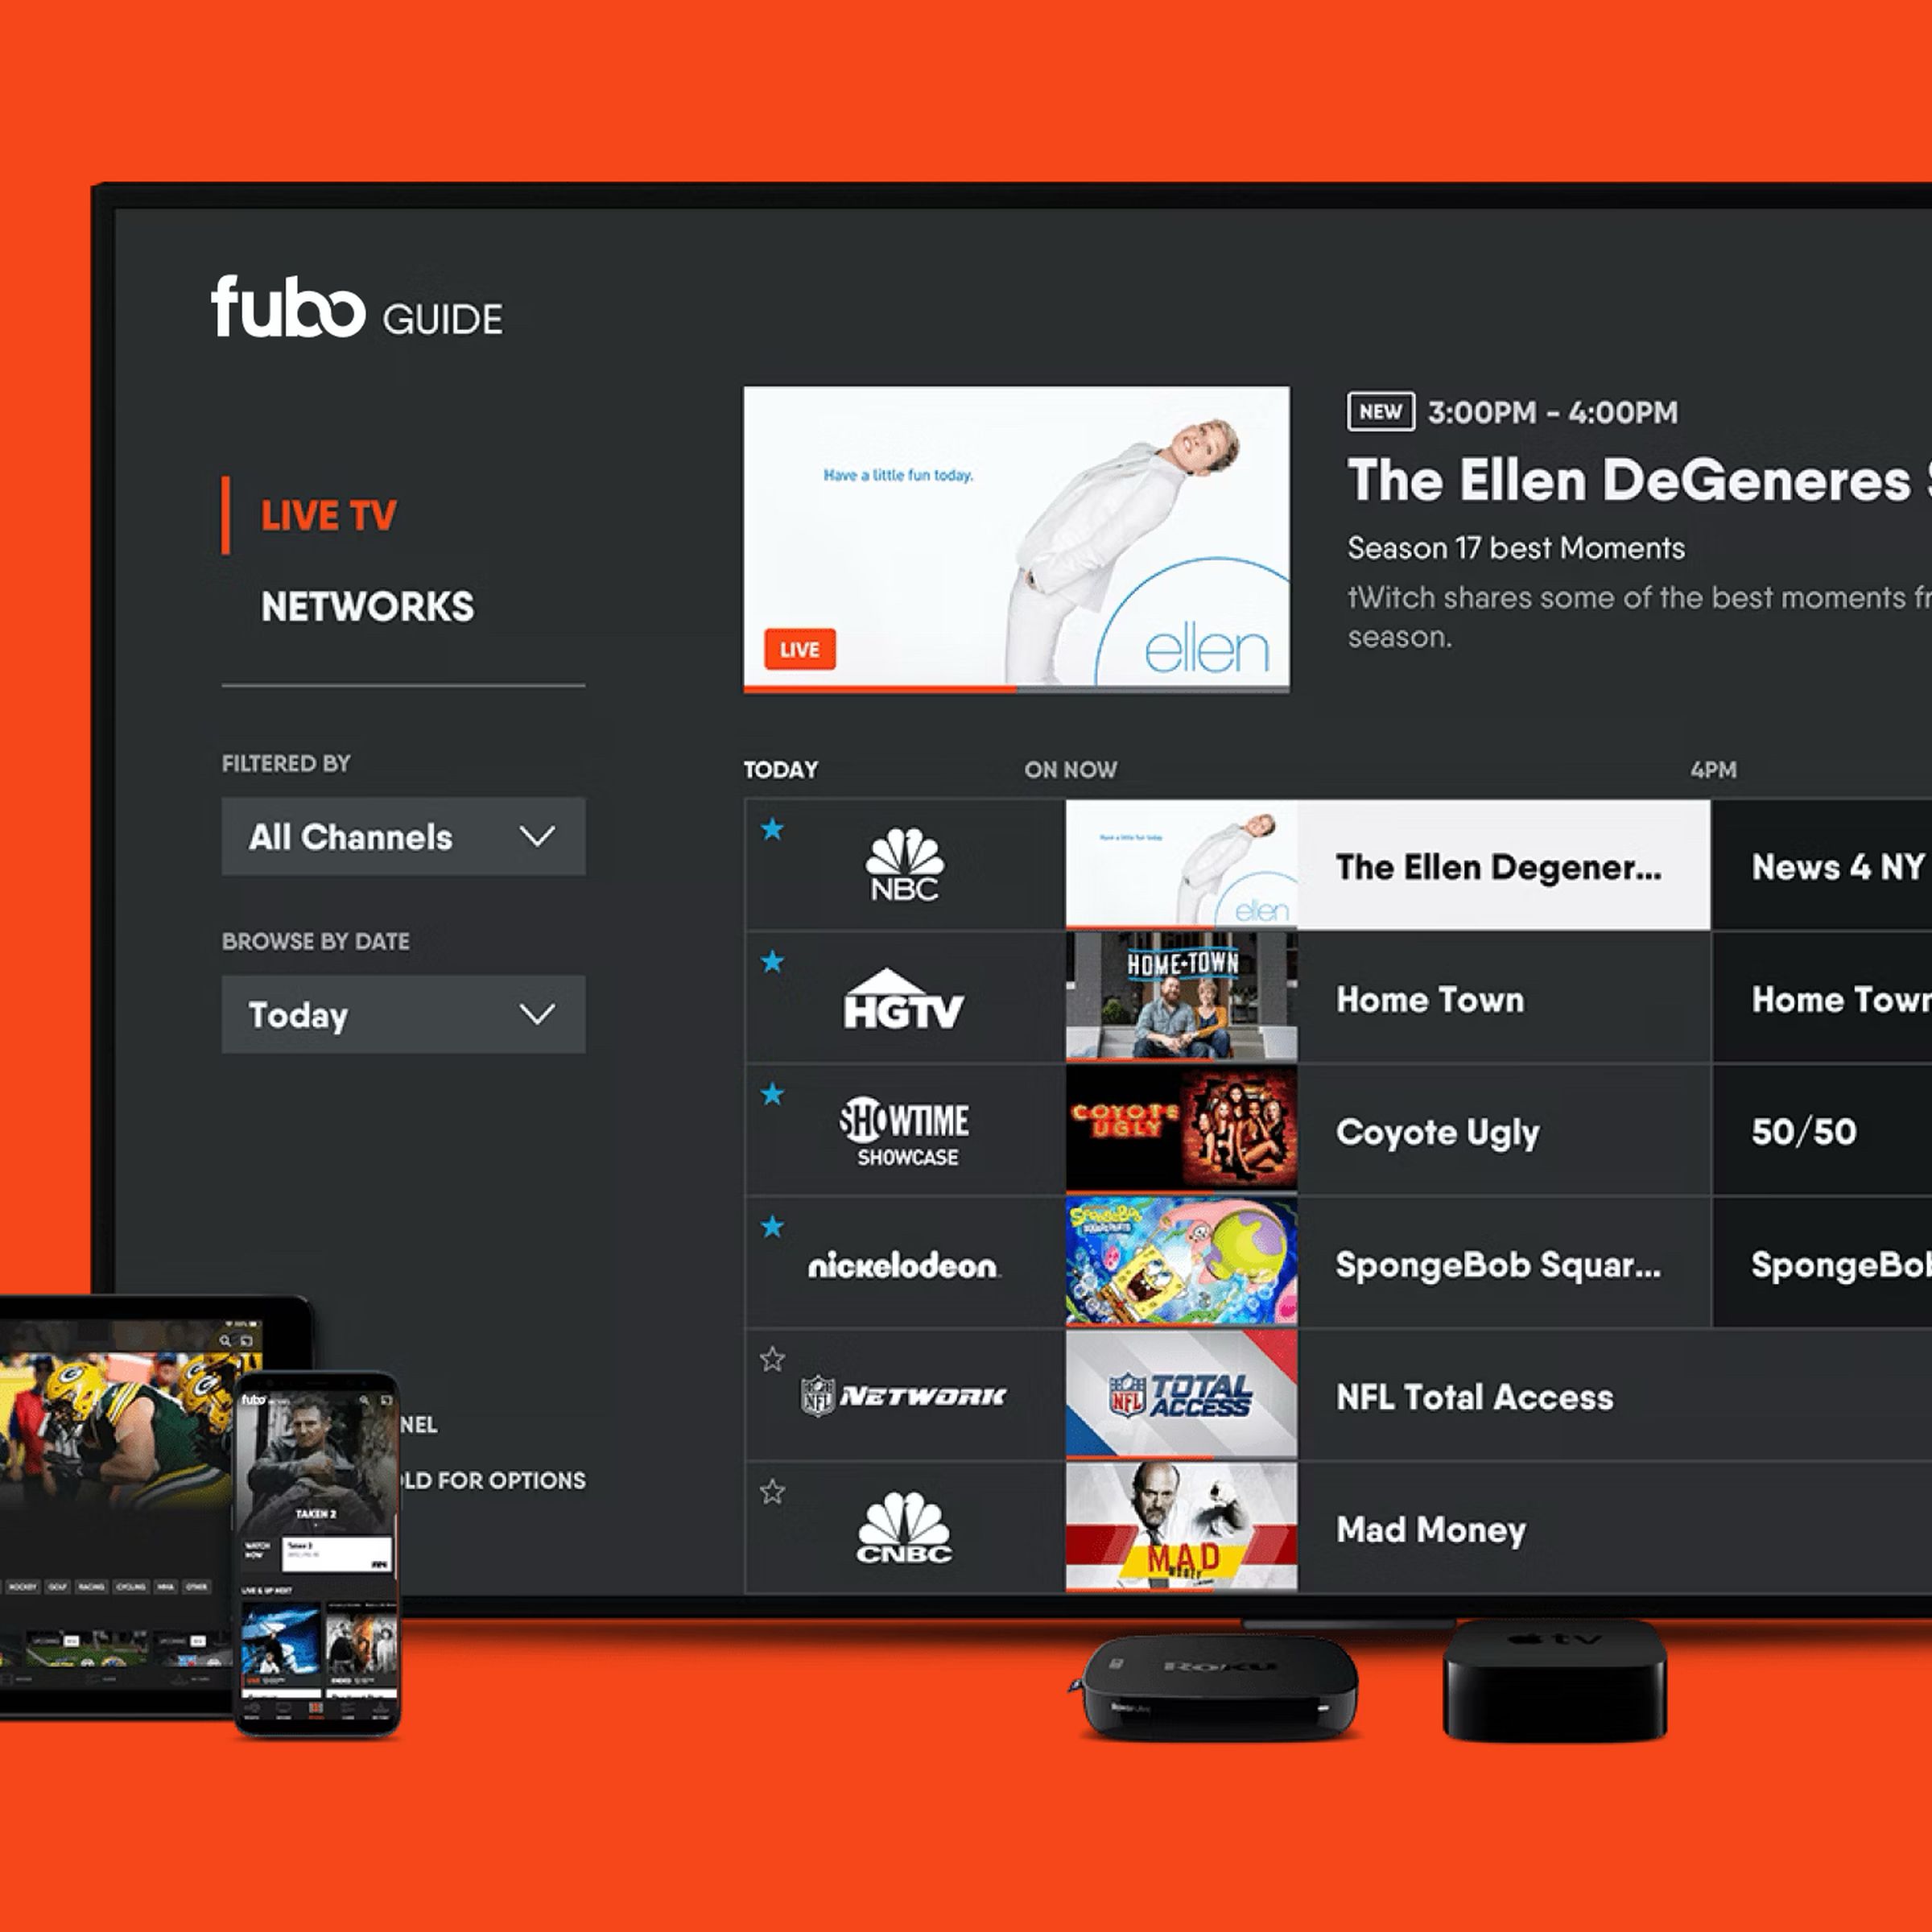 A marketing image of Fubo’s streaming TV service.